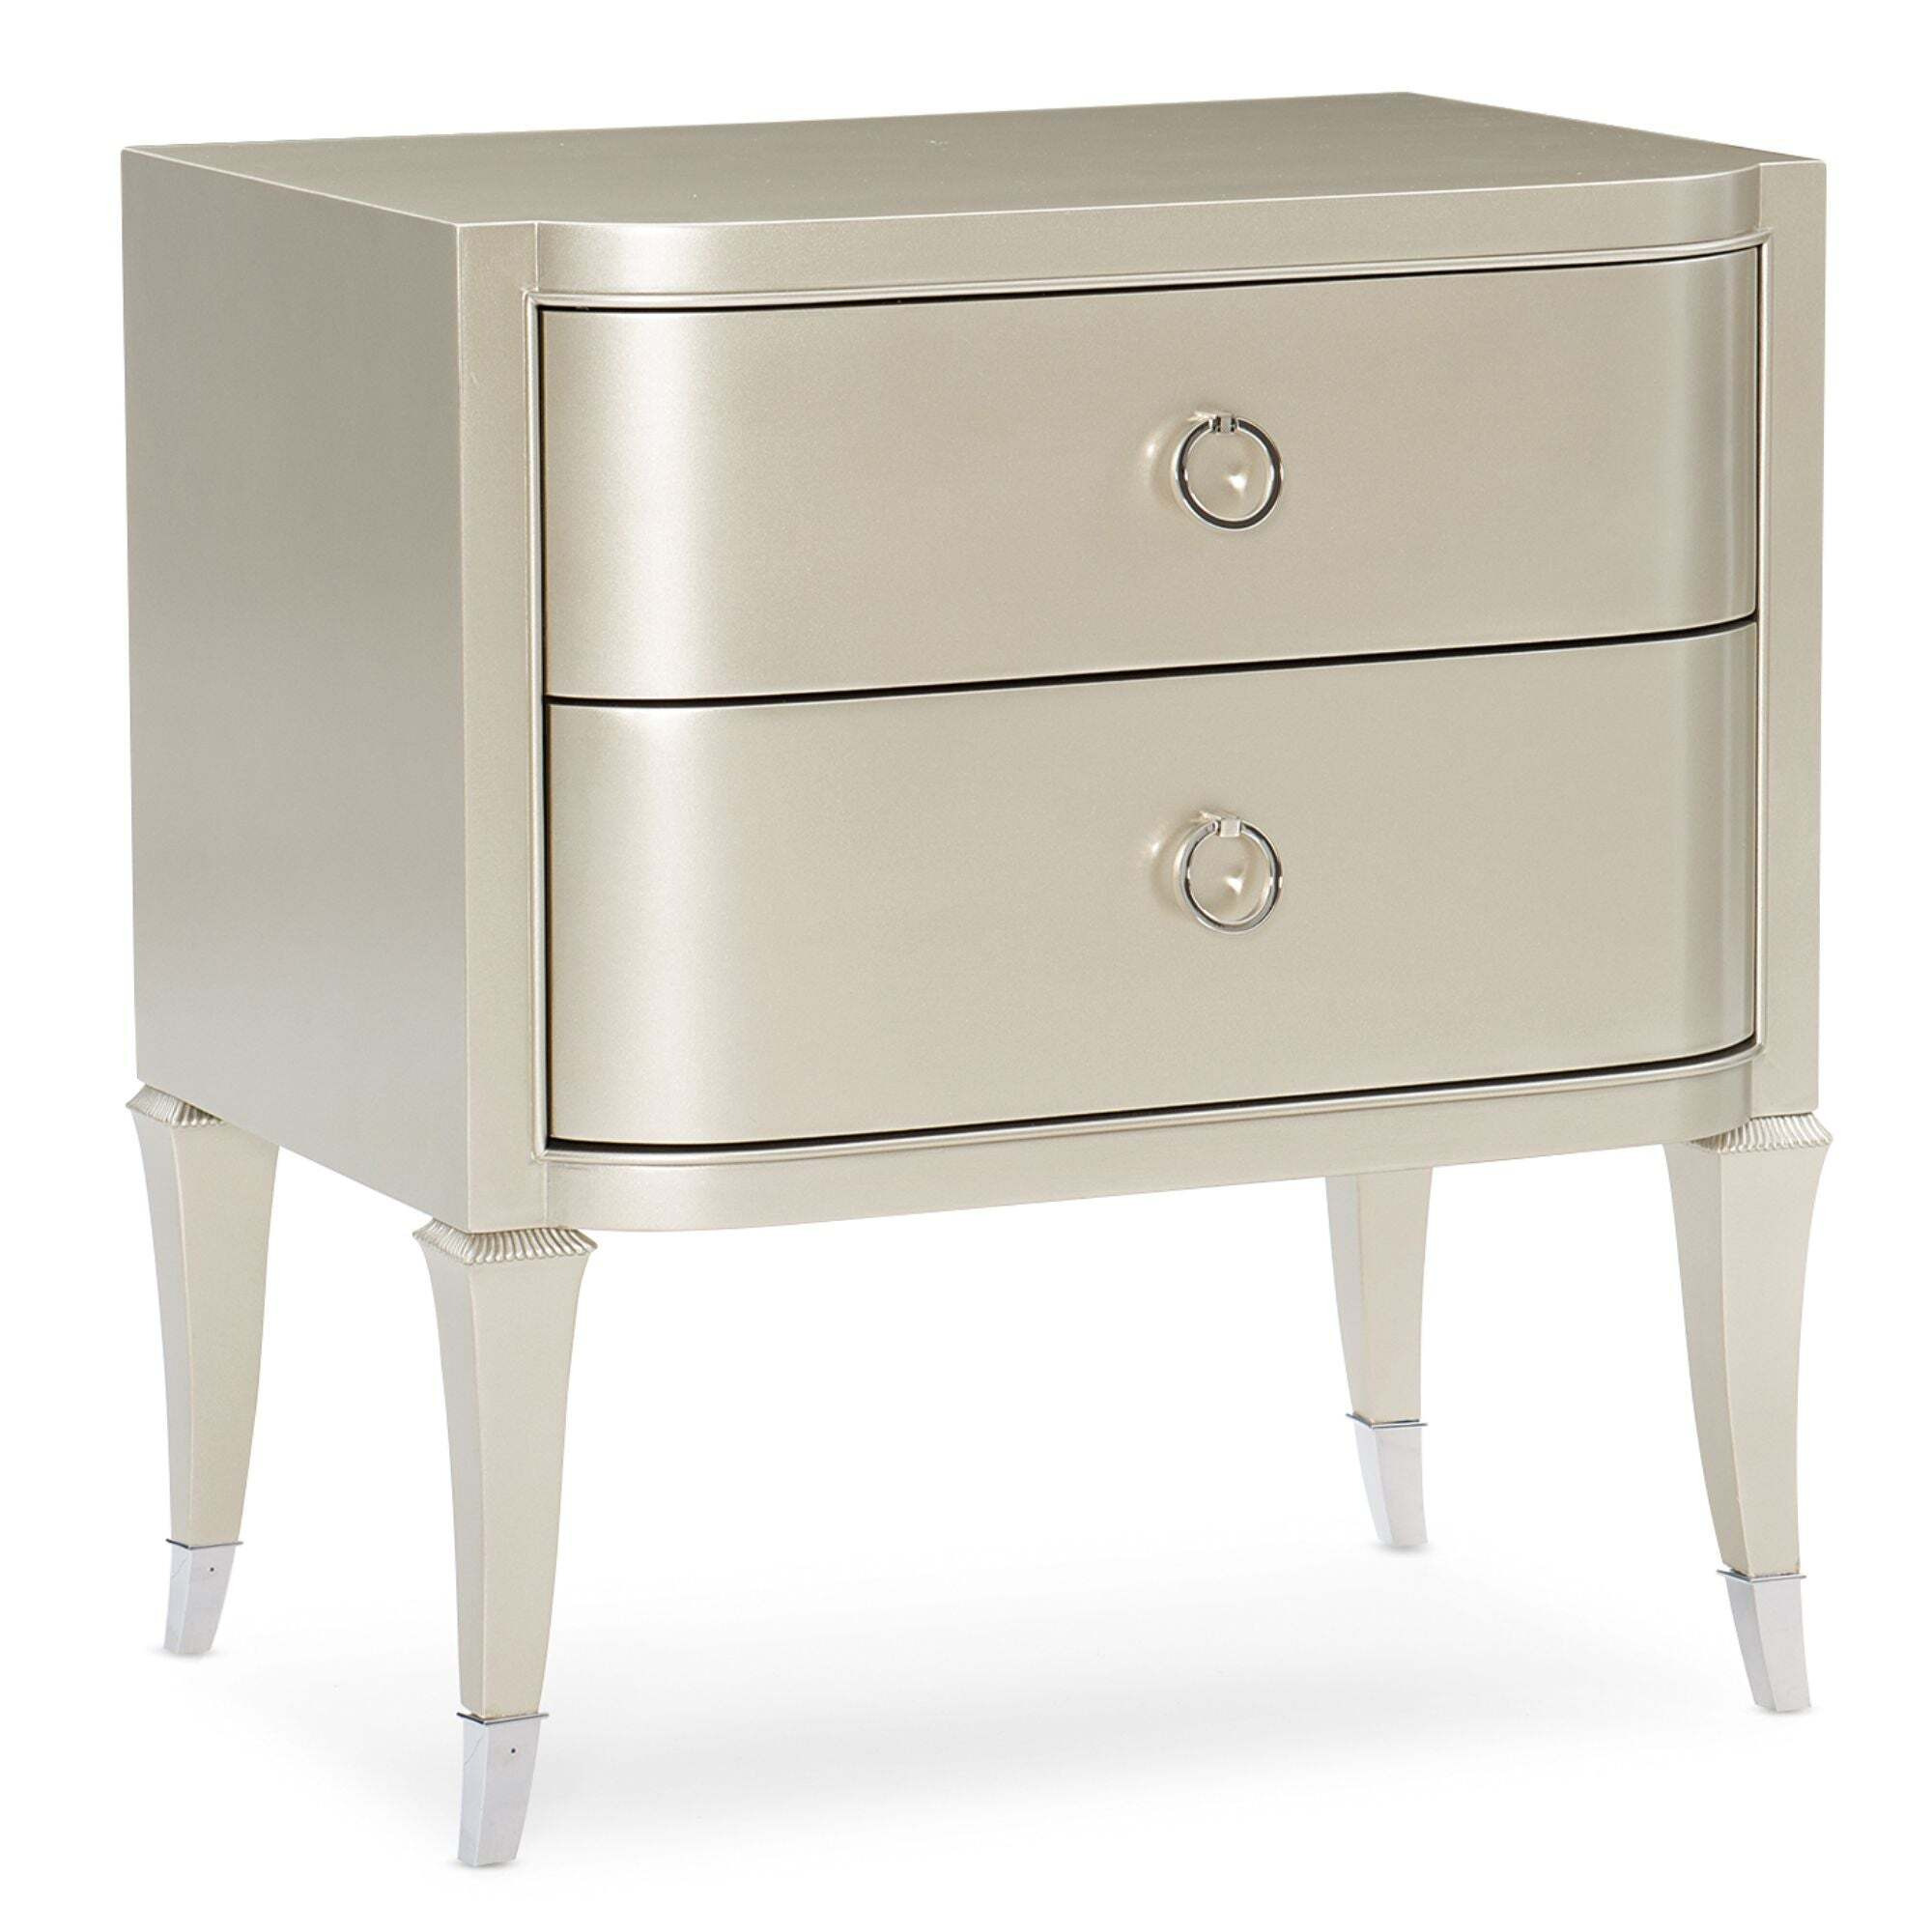 Caracole Classic Significant Other Bedside Table - image 1